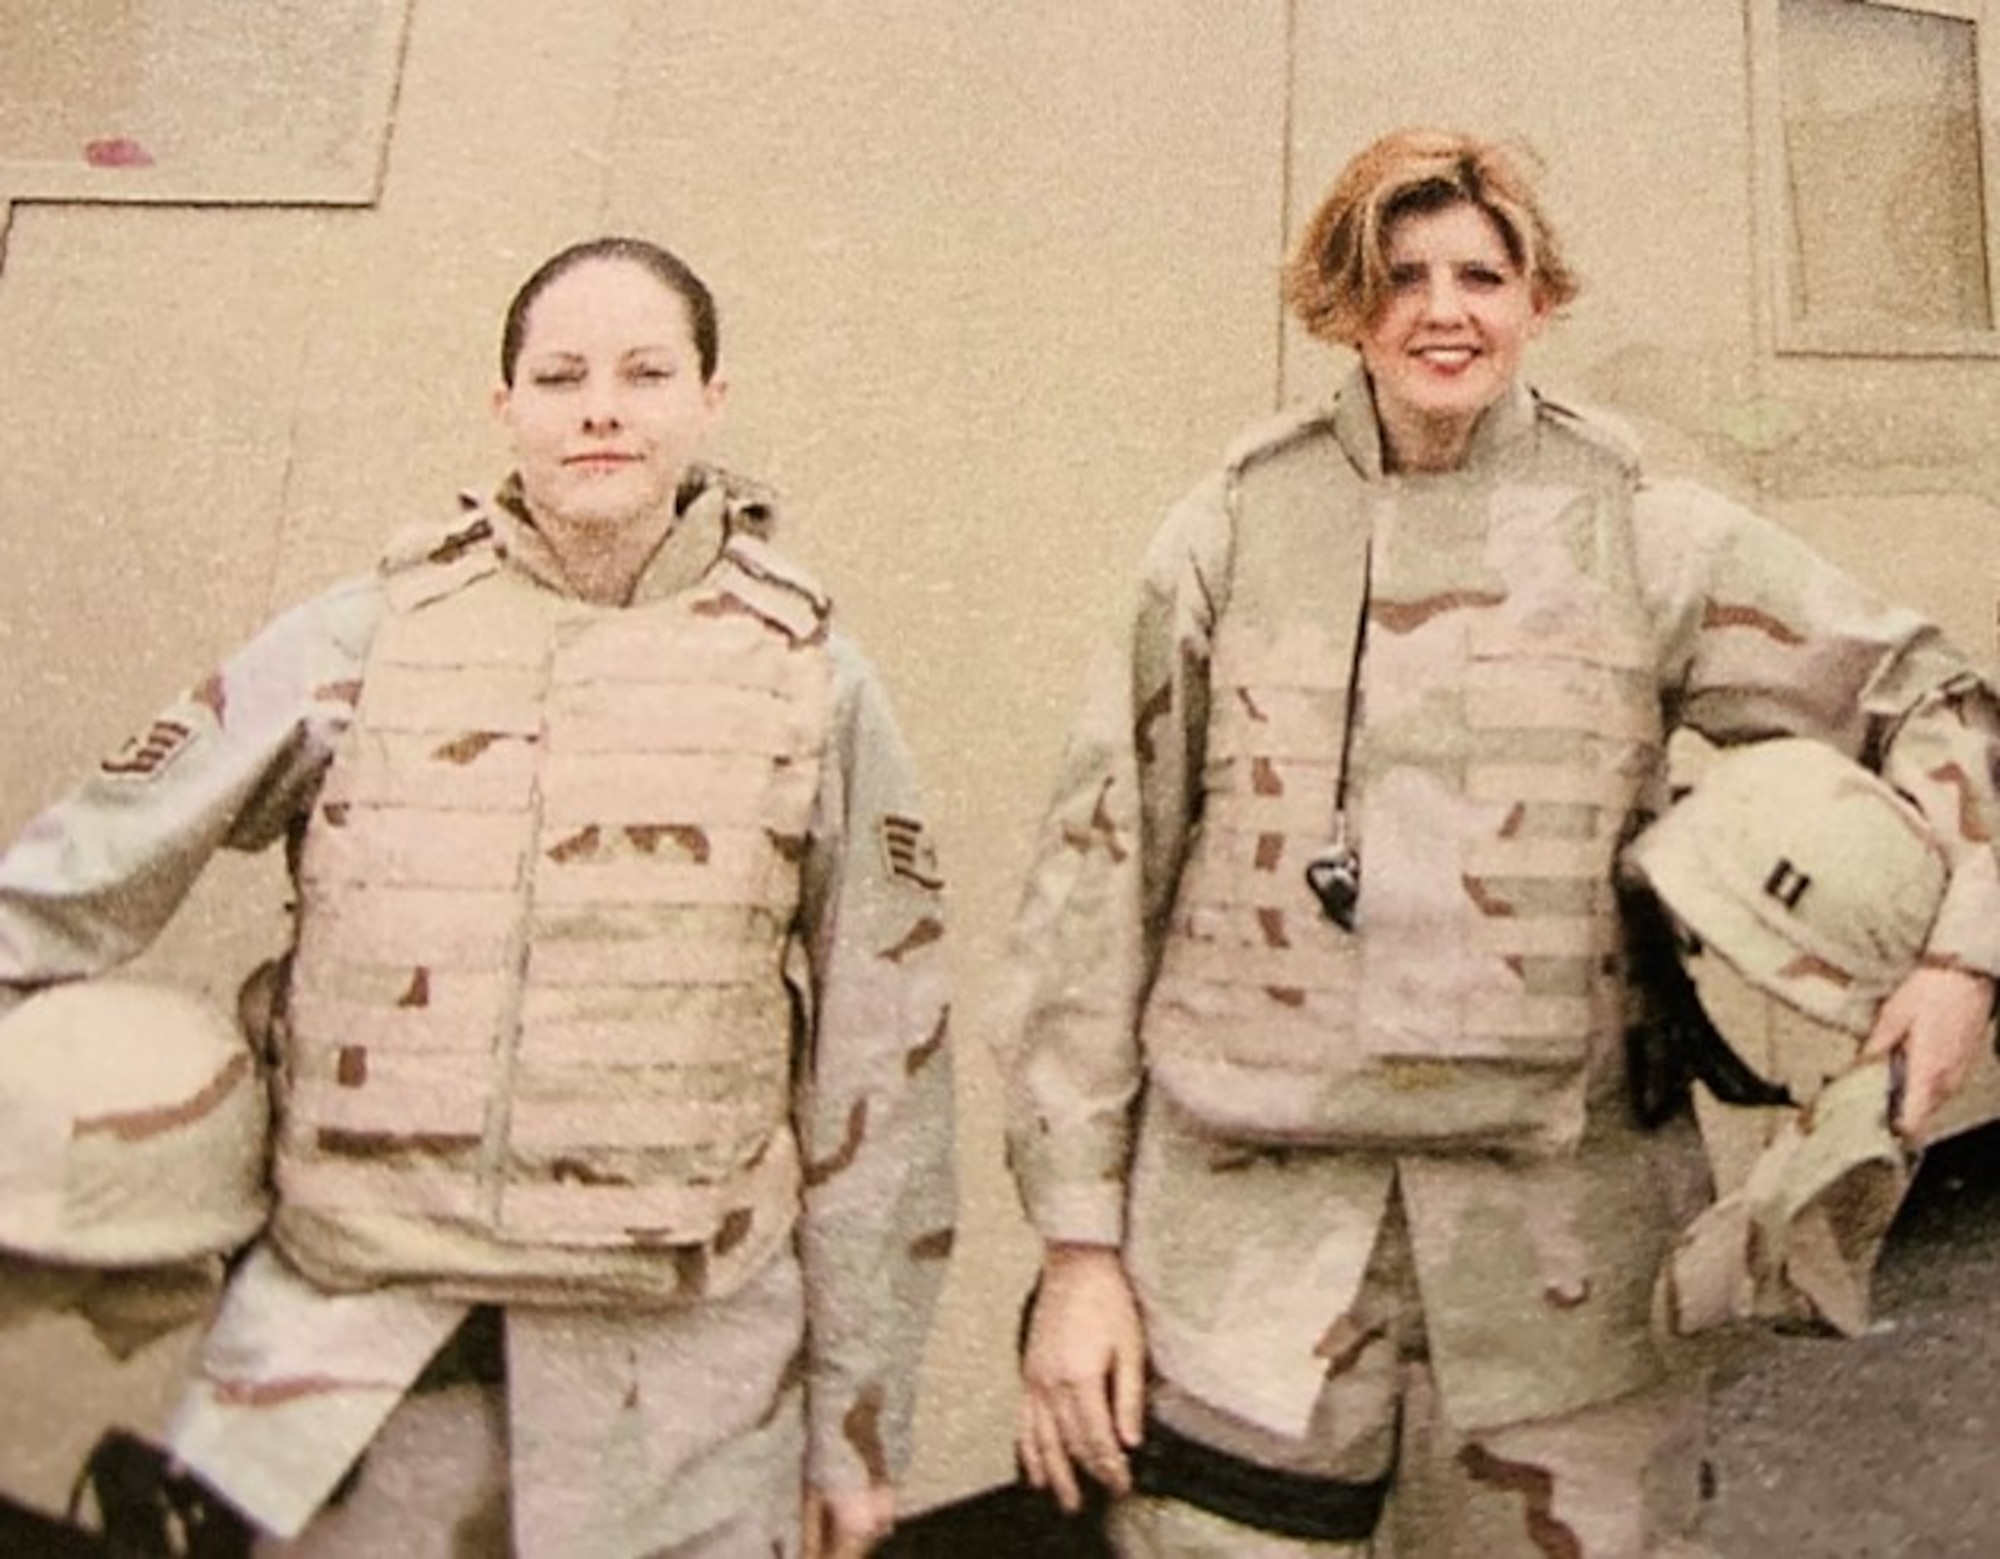 Then Staff Sgt., now Maj. Debora Berg (left), current 436th Contracting Squadron commander, and then Capt. Renee Russo (right), current 436th CONS director of business operations, pose for a photo during their 2006 deployment to Kabul, Afghanistan. Russo served as Berg’s commanding officer in 2006. Today, their roles are reversed, as Berg oversees the unit. (Courtesy photo)